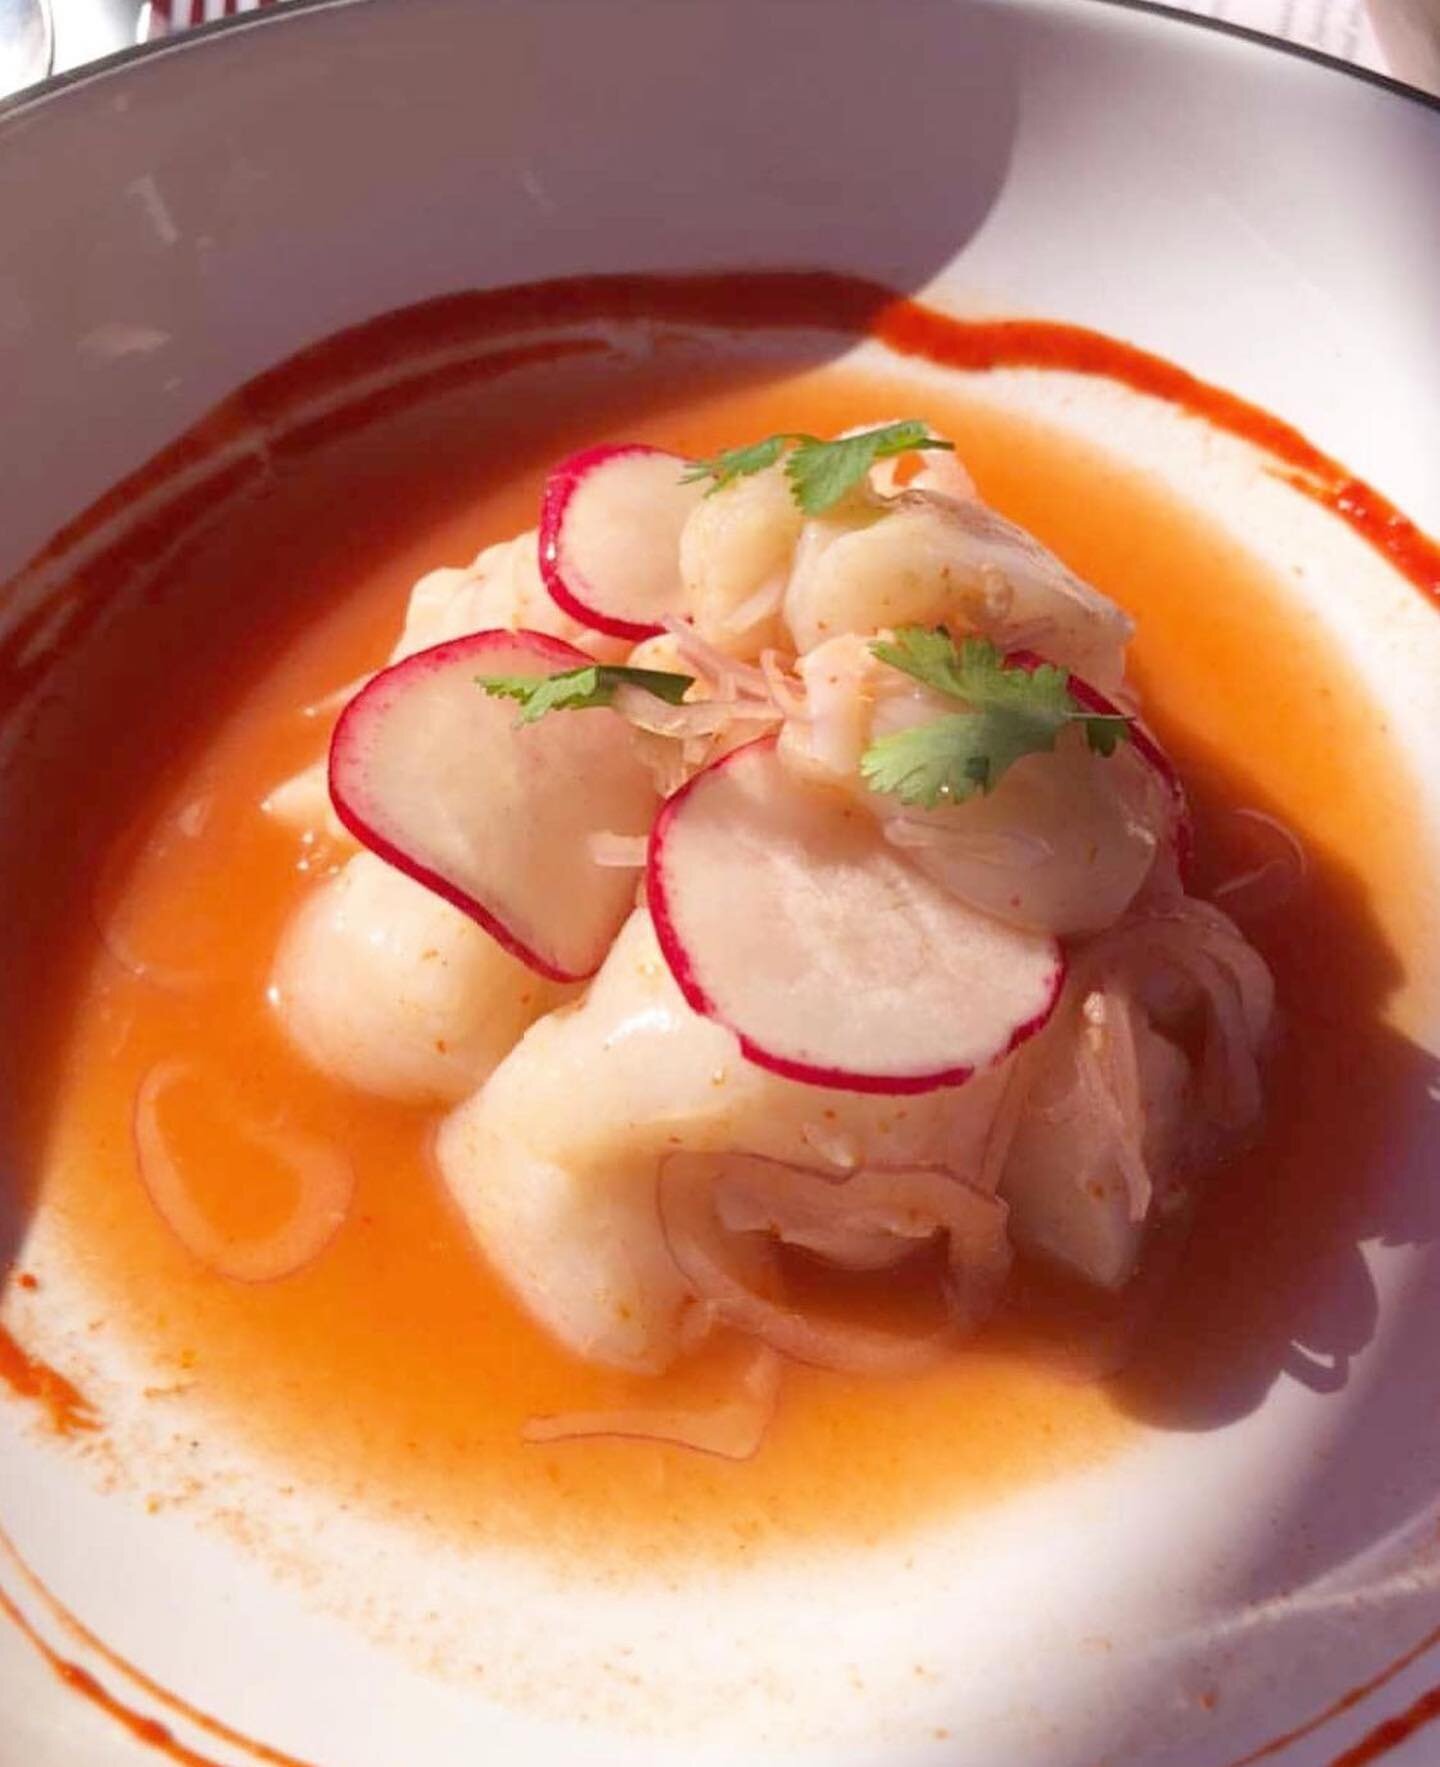 Guess what&rsquo;s back? Our Pacific Northwest Ceviche, that&rsquo;s what! Made with octopus, spot prawn, scallops &amp; halibut in a strawberry &amp; kohlrabi gazpacho sauce with Aji panca and lime marinade. Pair with a grapefruit gimlet for the per